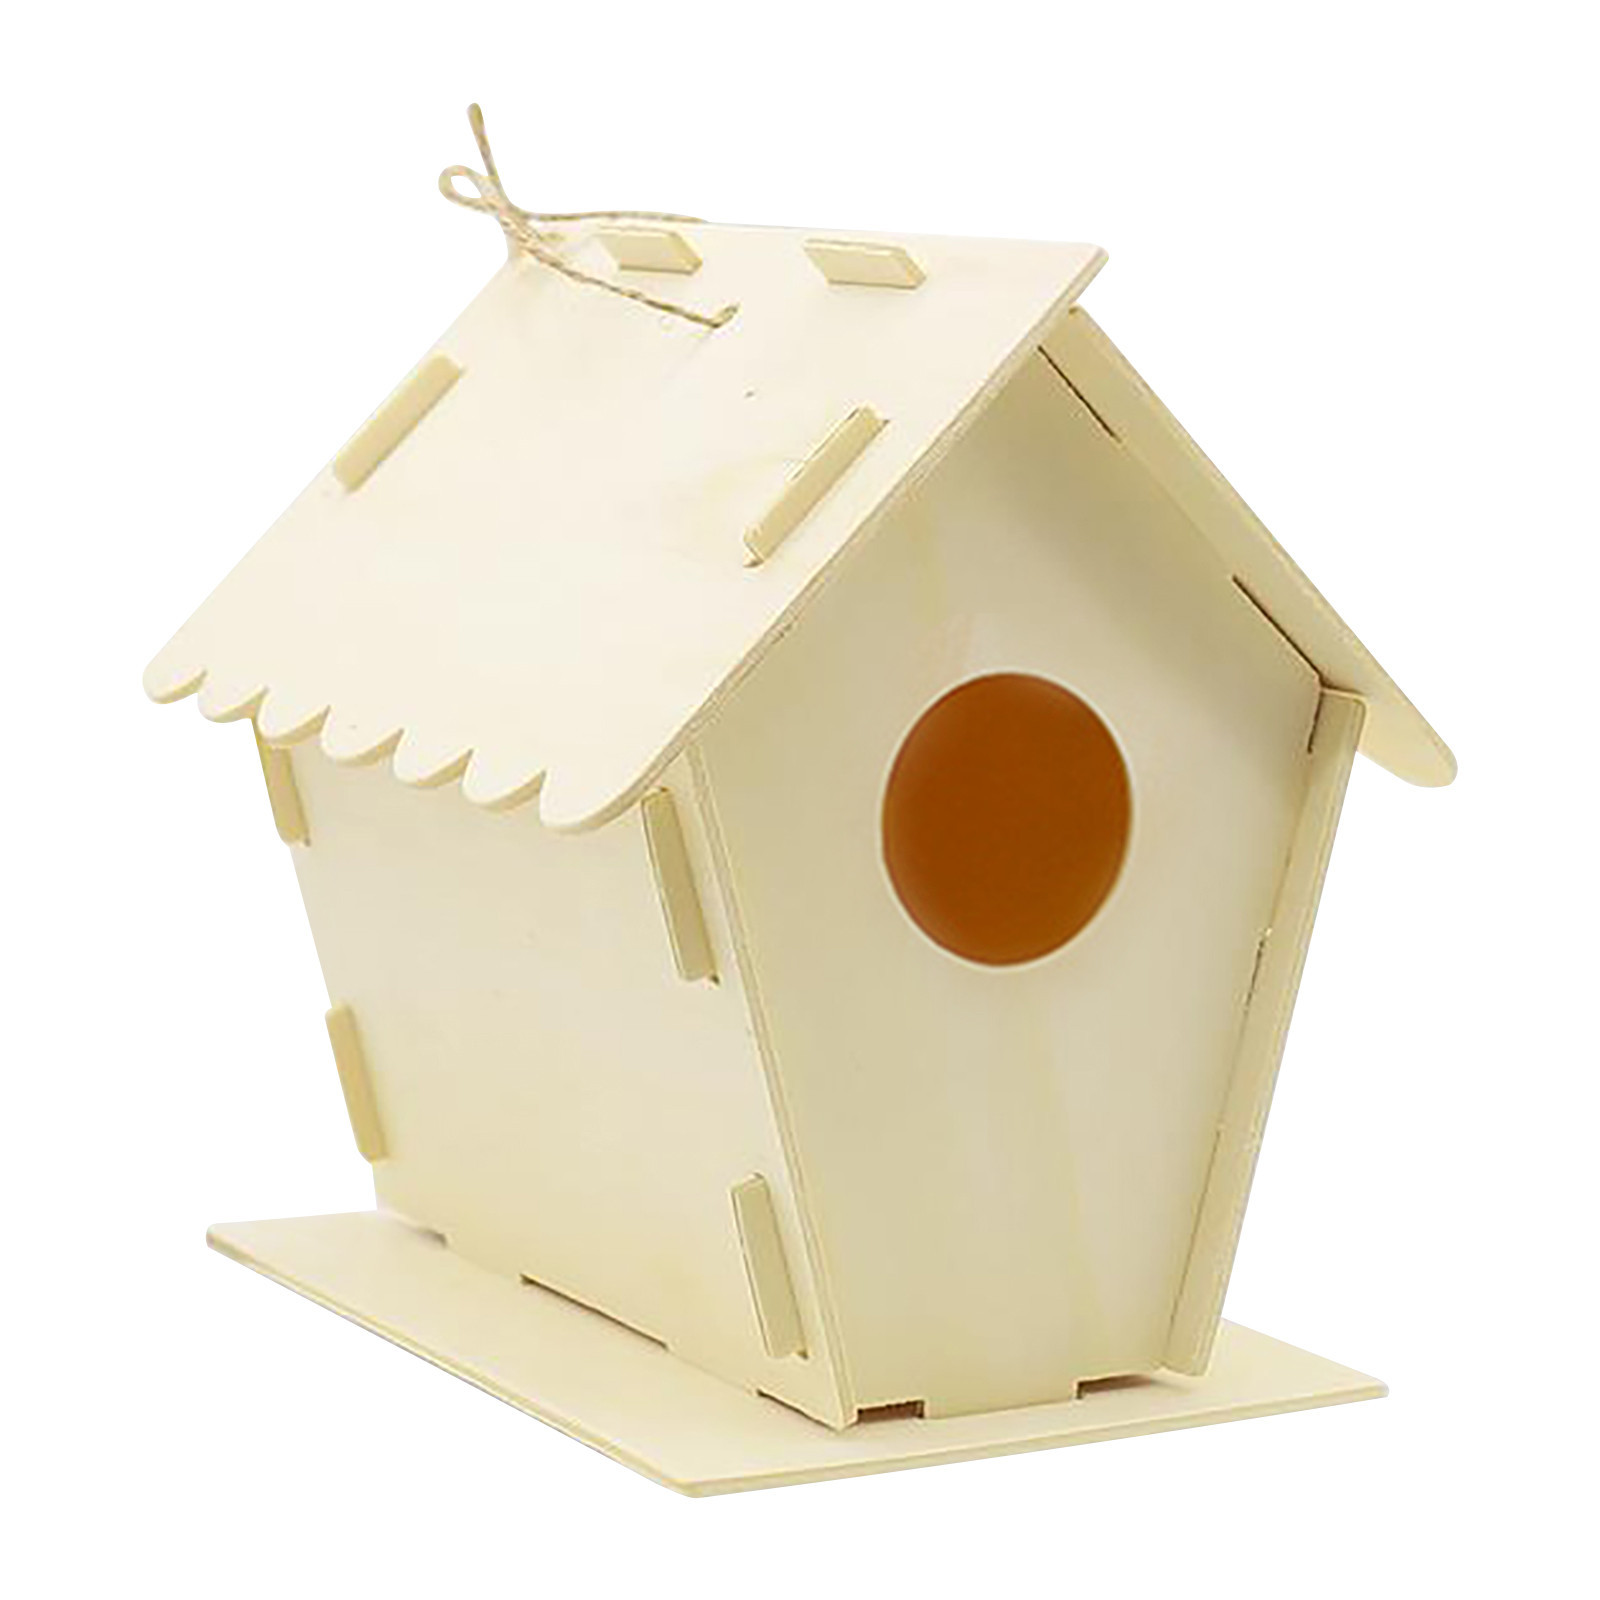 Wooden DIY birdhouse Art Craft Wood Toys 3D Painting Bird House For Kid Children Education for outdoor